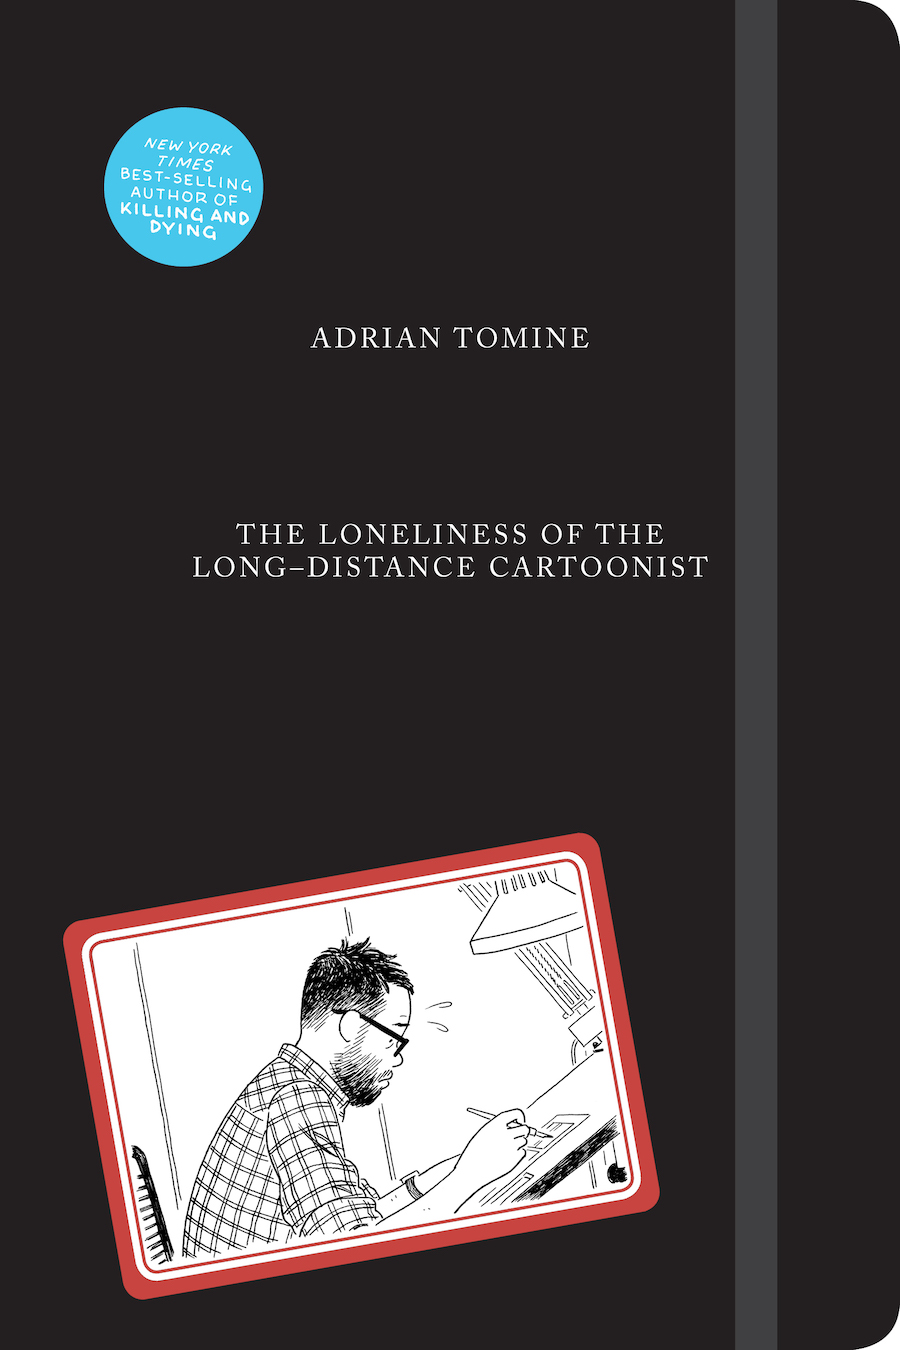 The book cover for The Lonliness of the Long Distance Cartoonist